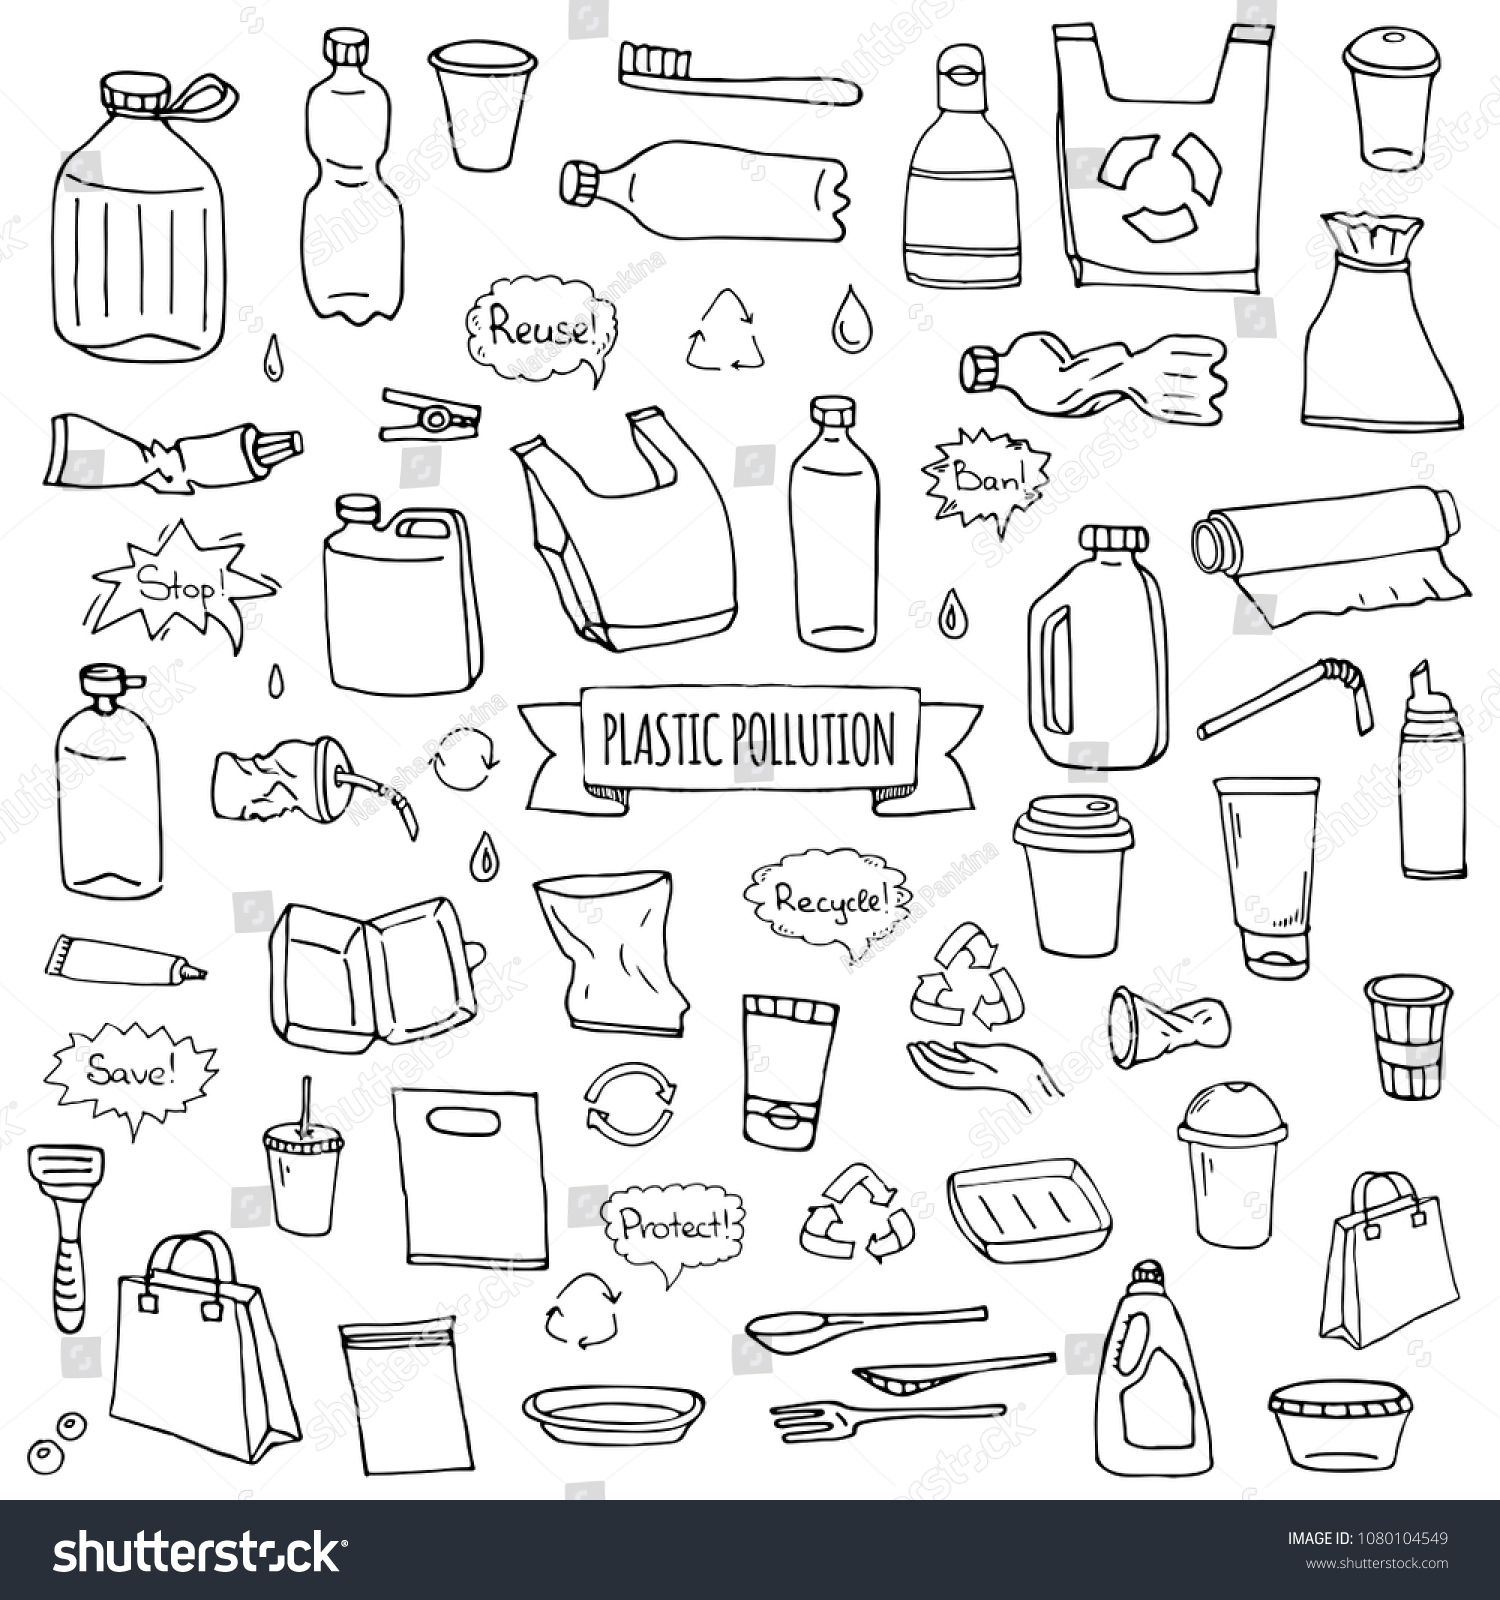 SVG of Hand drawn doodle Stop plastic pollution icons set Vector illustration sketchy symbols collection Cartoon concept elements Bag Bottle Recycle sign Package Disposal waste Contamination disposable dish svg